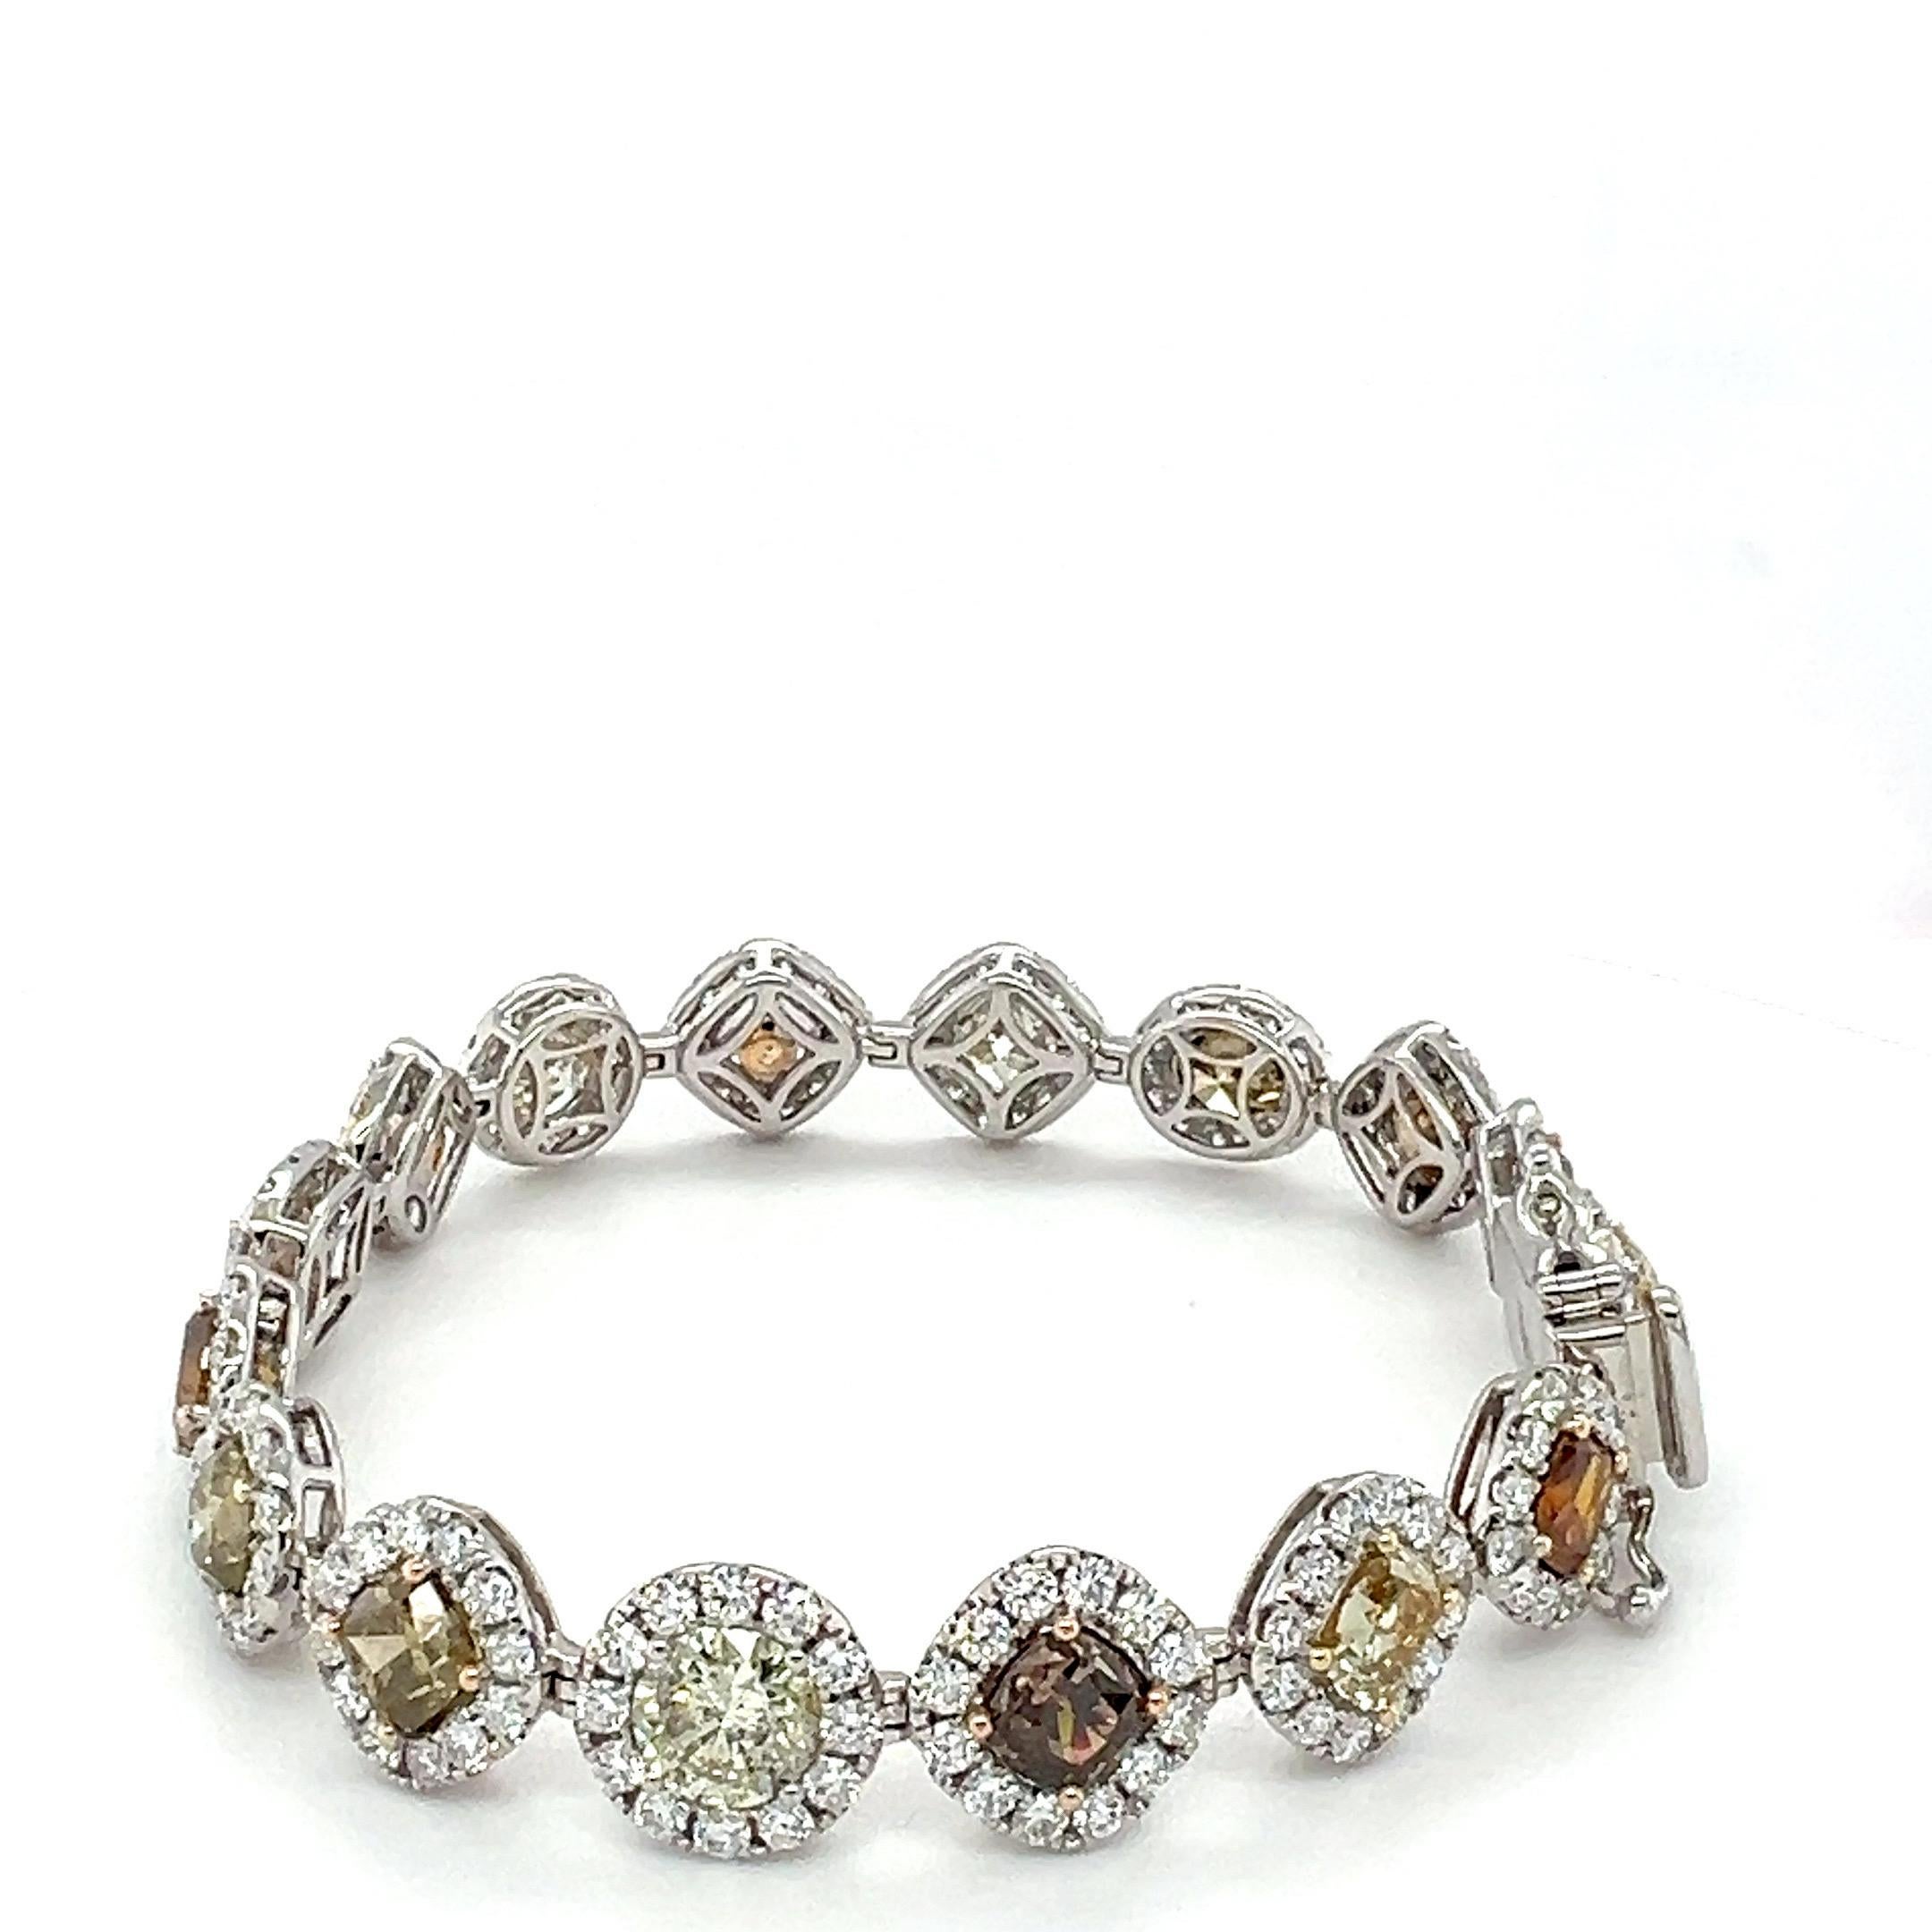 Natural 16 diamond weighing 16.36 and halo of white round diamonds 5.63 carat set in 18K two tone gold is one of a kind bracelet. The bracelet is 7.5 inches long . All the color diamonds are natural color which is 3rd rarest color orange, champagne,